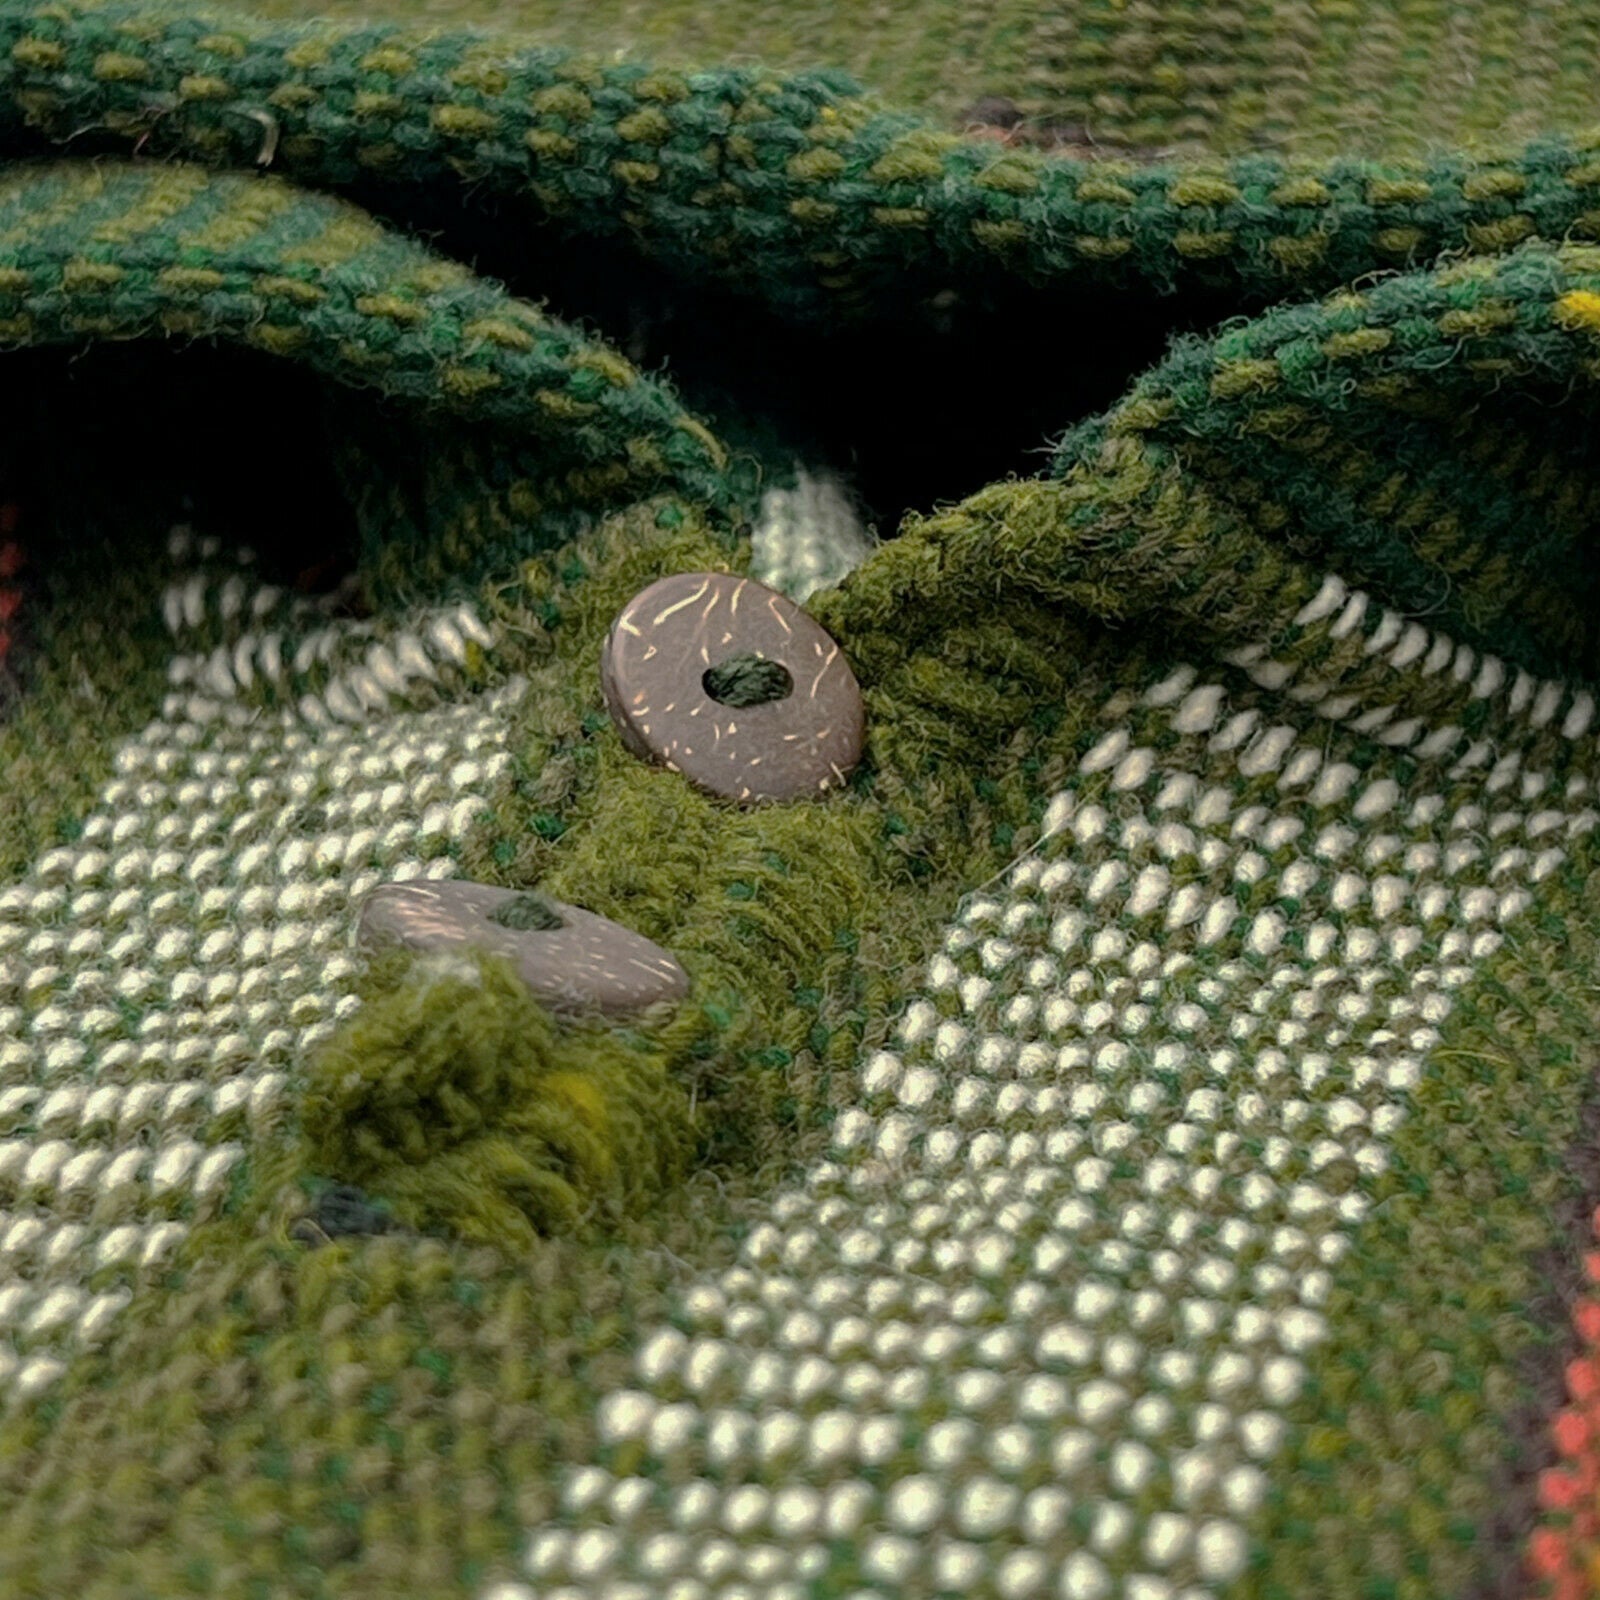 Mayaicu - Llama Wool Unisex South American Handwoven Thick Hooded Poncho - striped - olive green